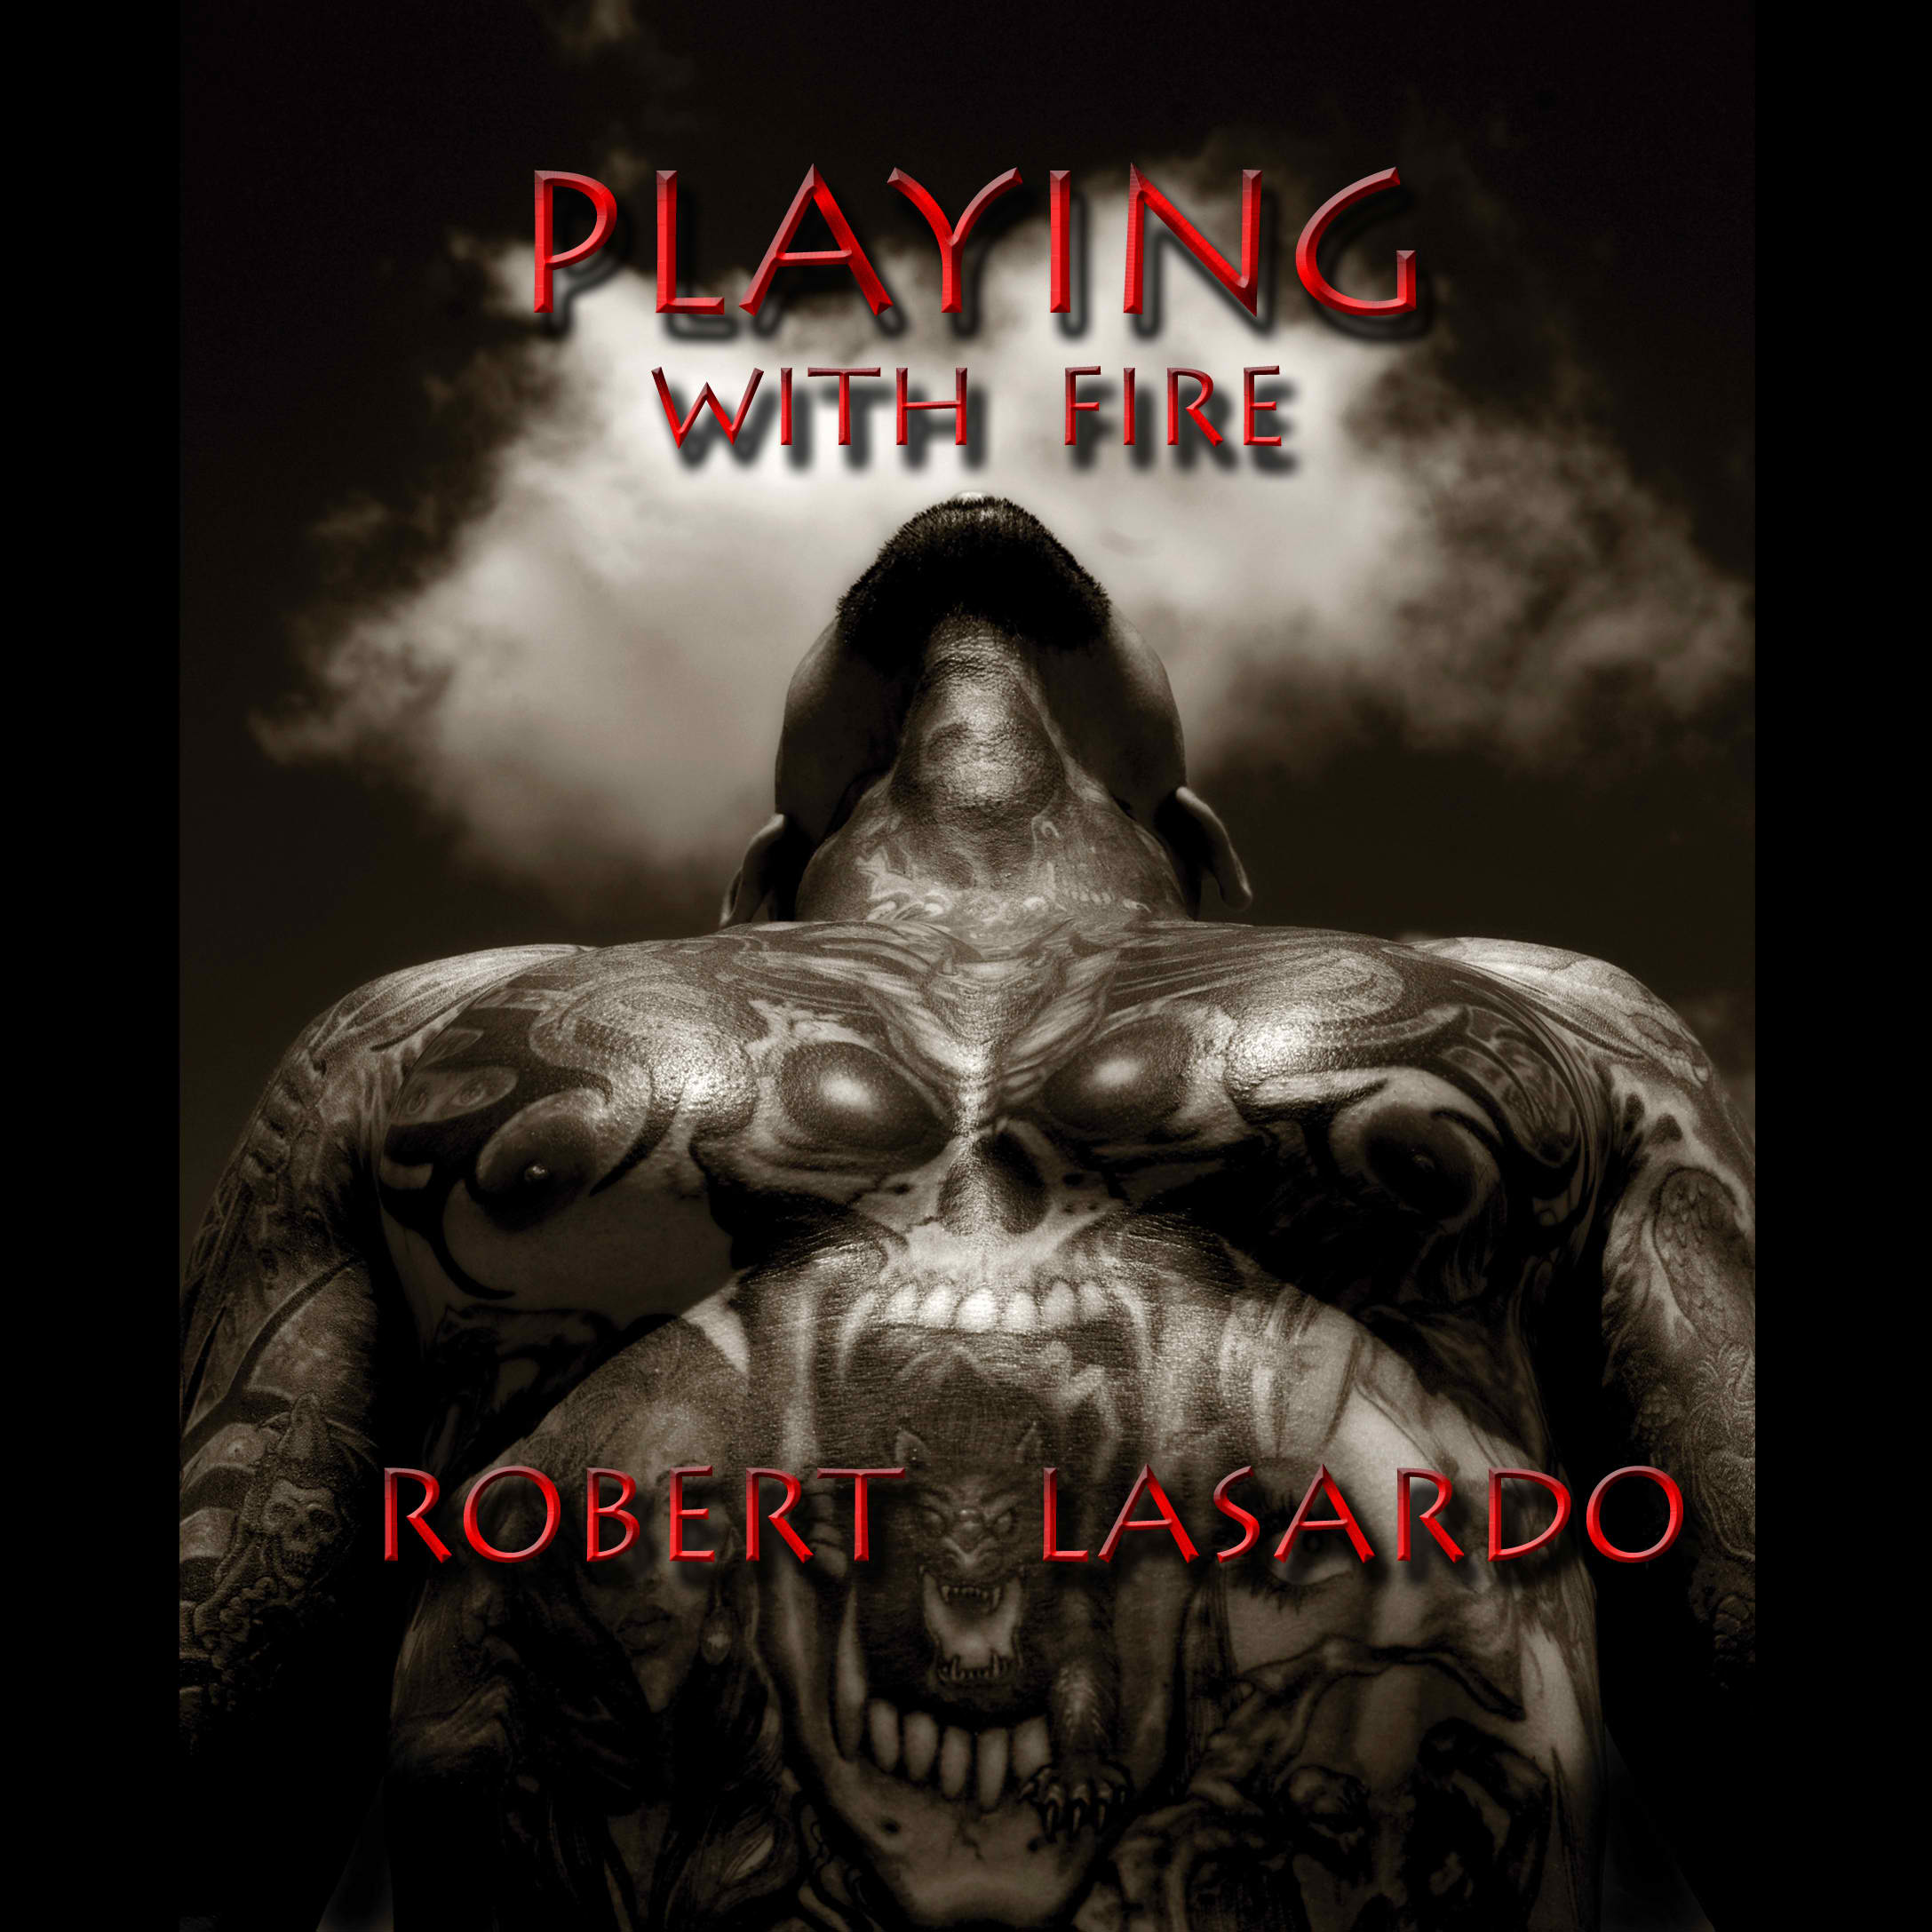 Cover photo for the book Playing With Fire